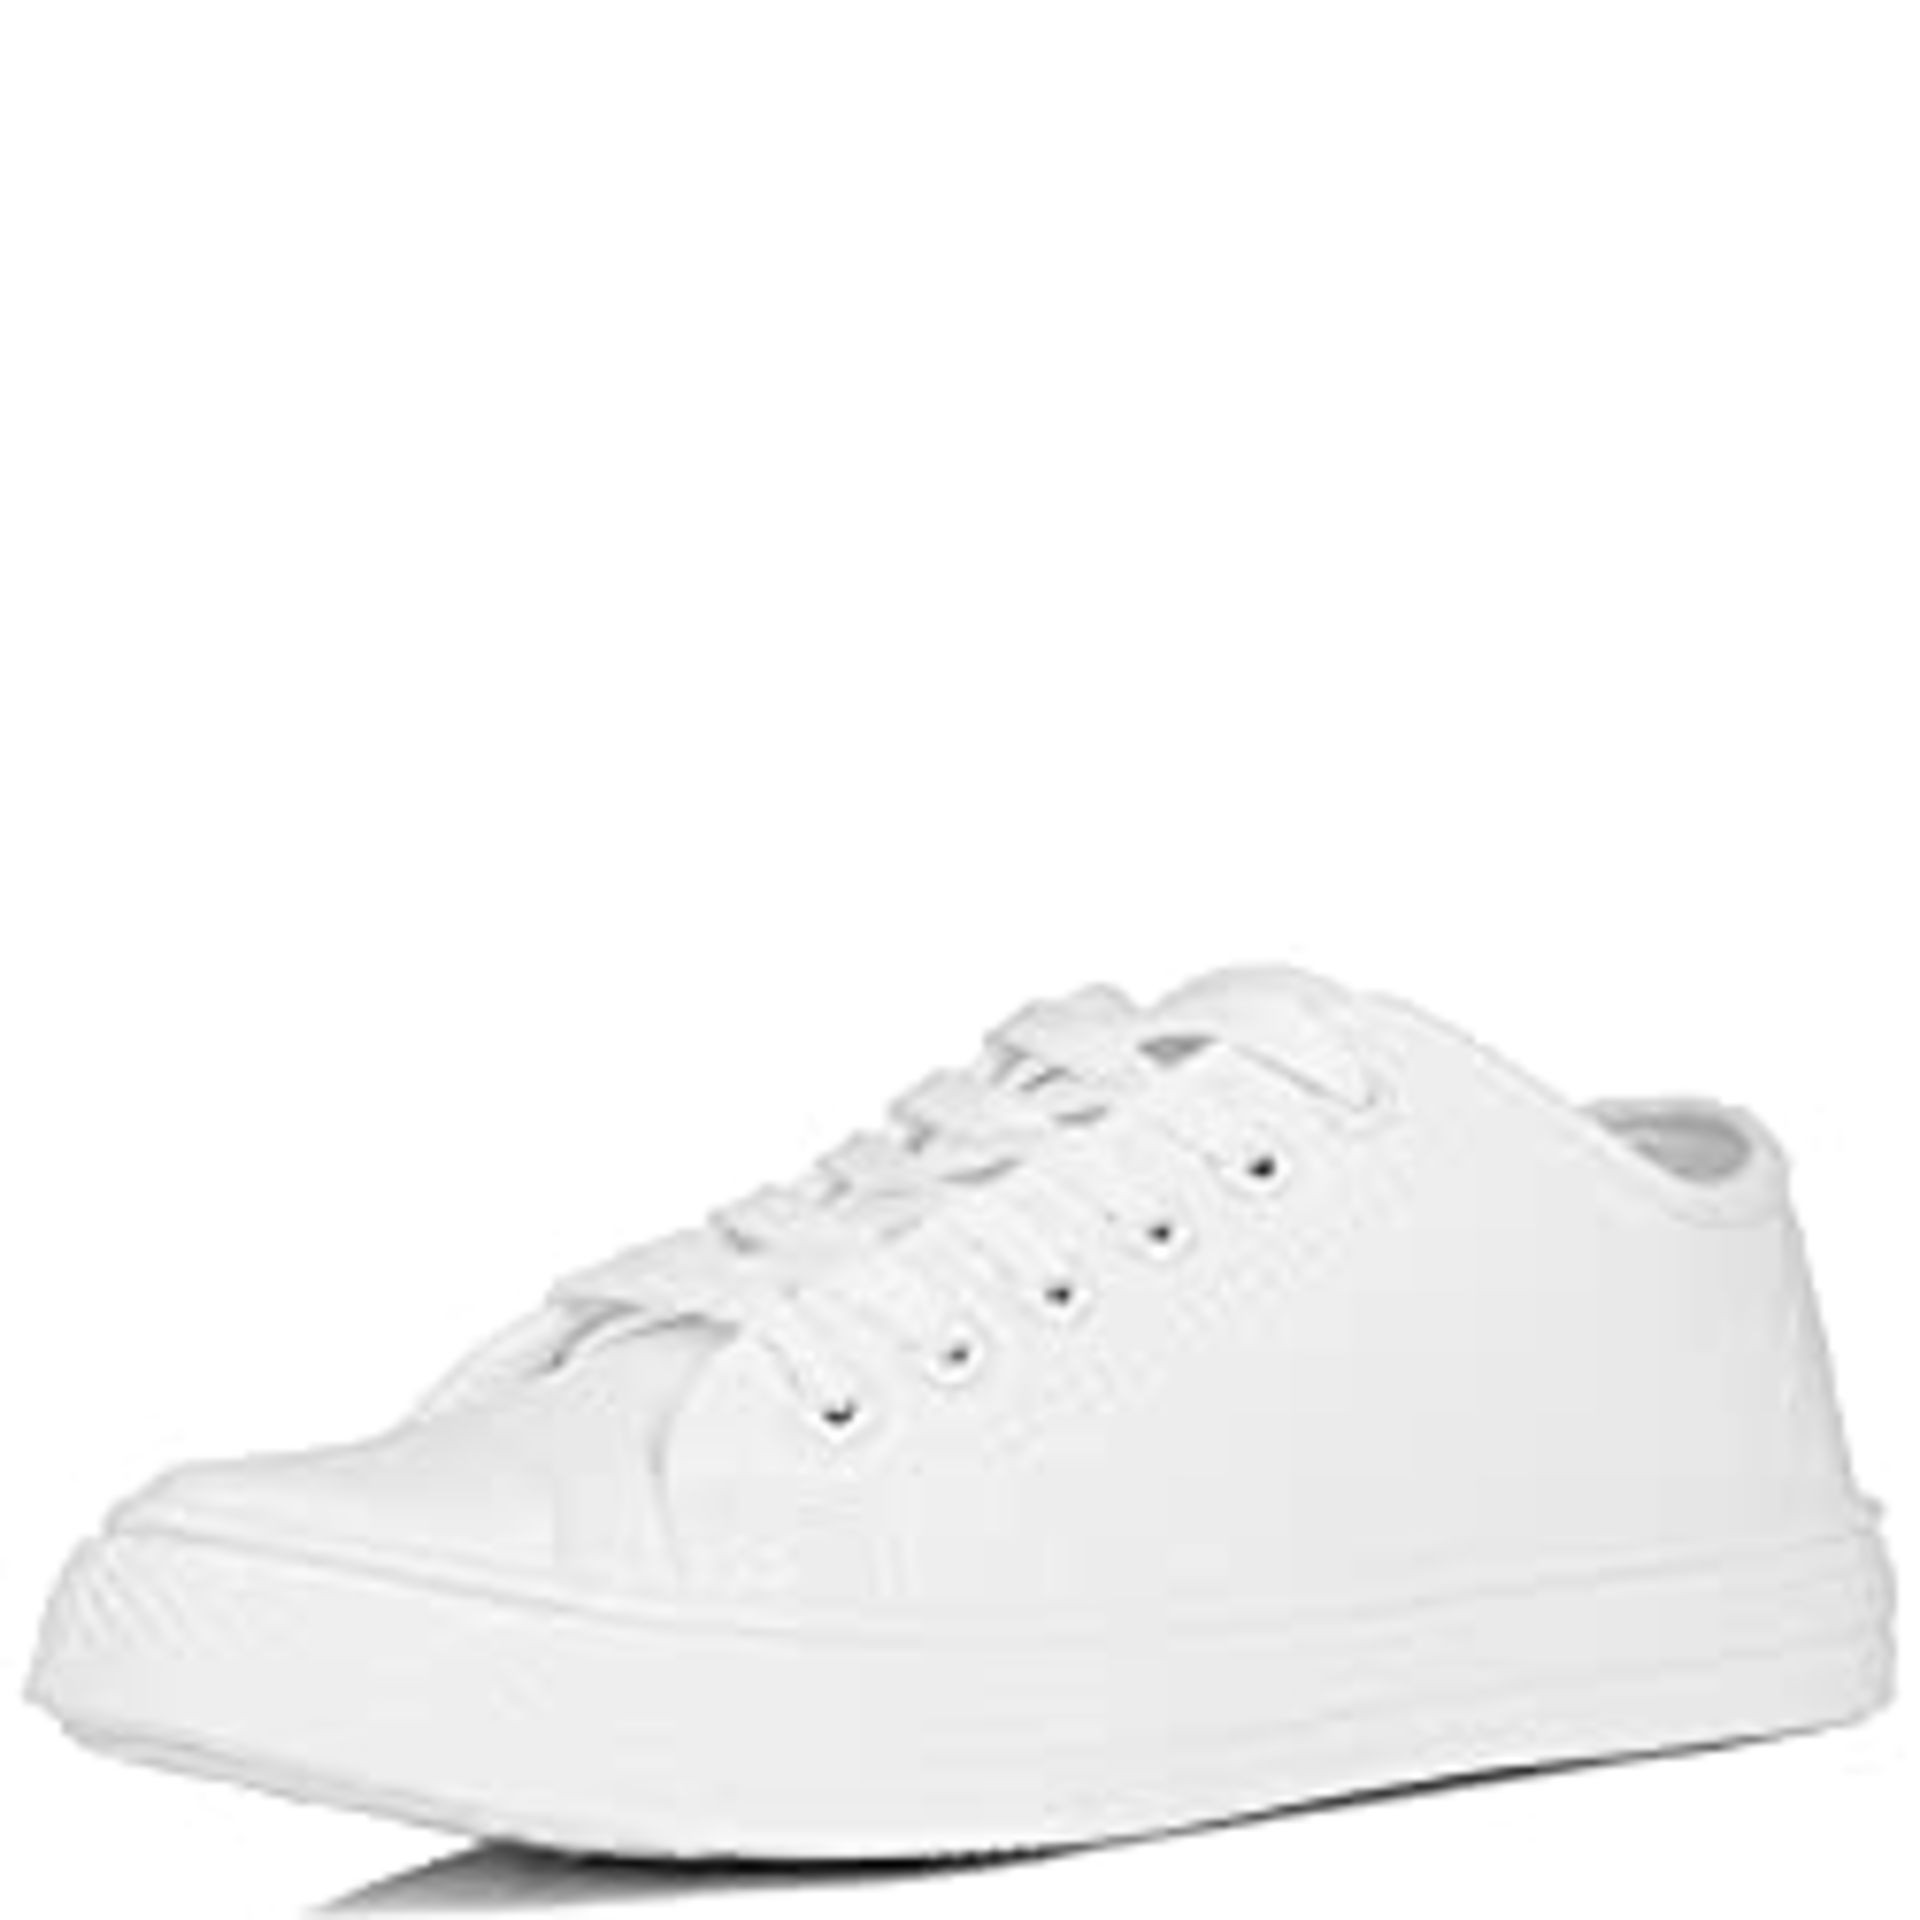 RRP £18.00 Lace Up Flat Trainers Shoes White Leather Style Sz 5